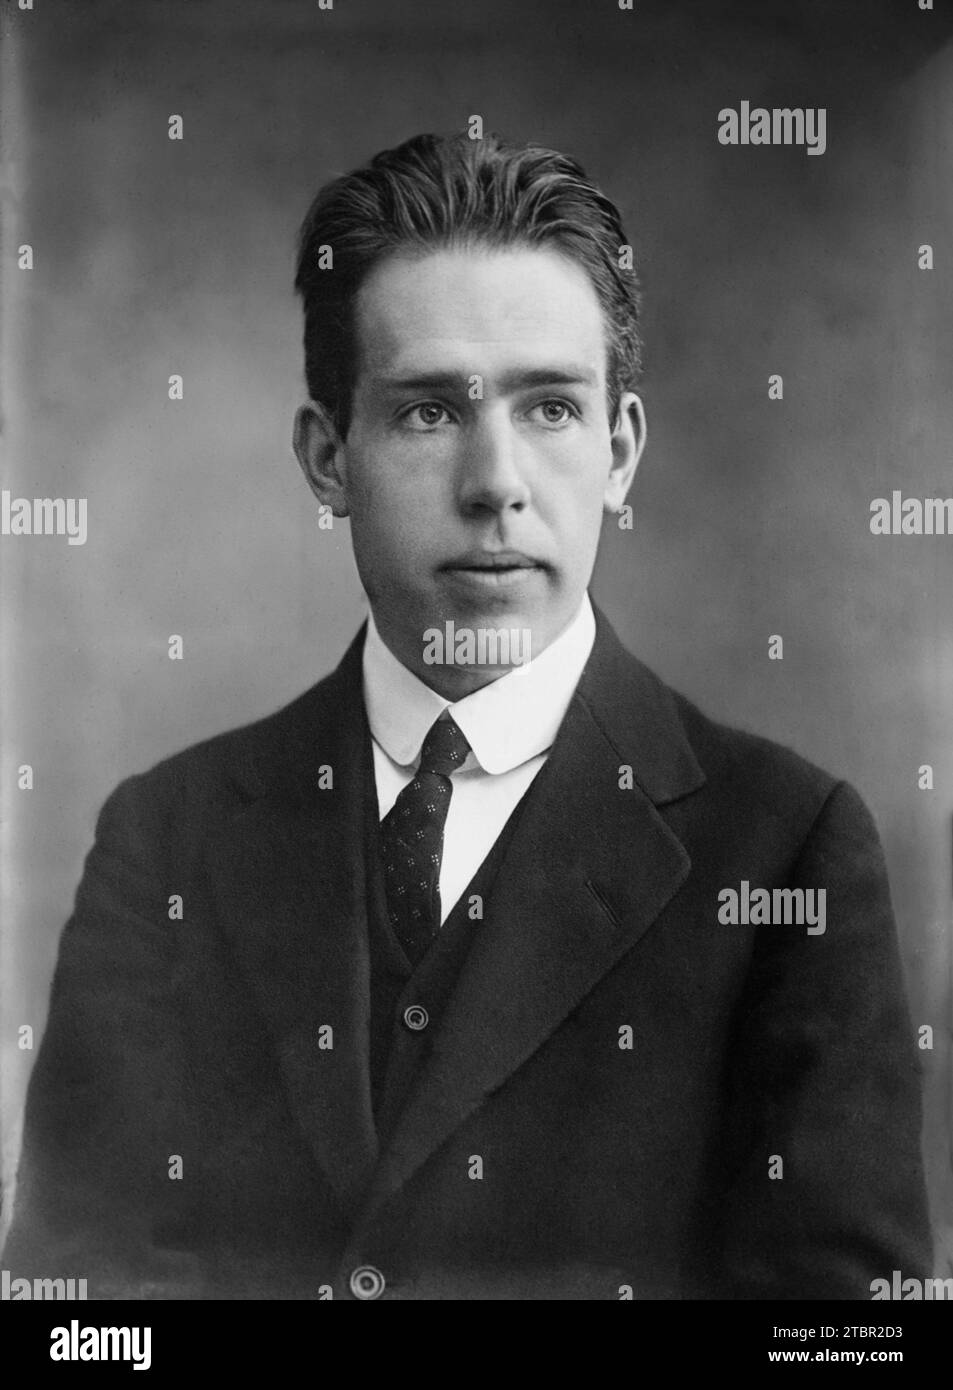 Prof. Niels Bohr. Circa 1910. LoC states the date to be around 1920-25 but based on his appearance, the photograph is closer to 1910. Publisher Bain N Stock Photo